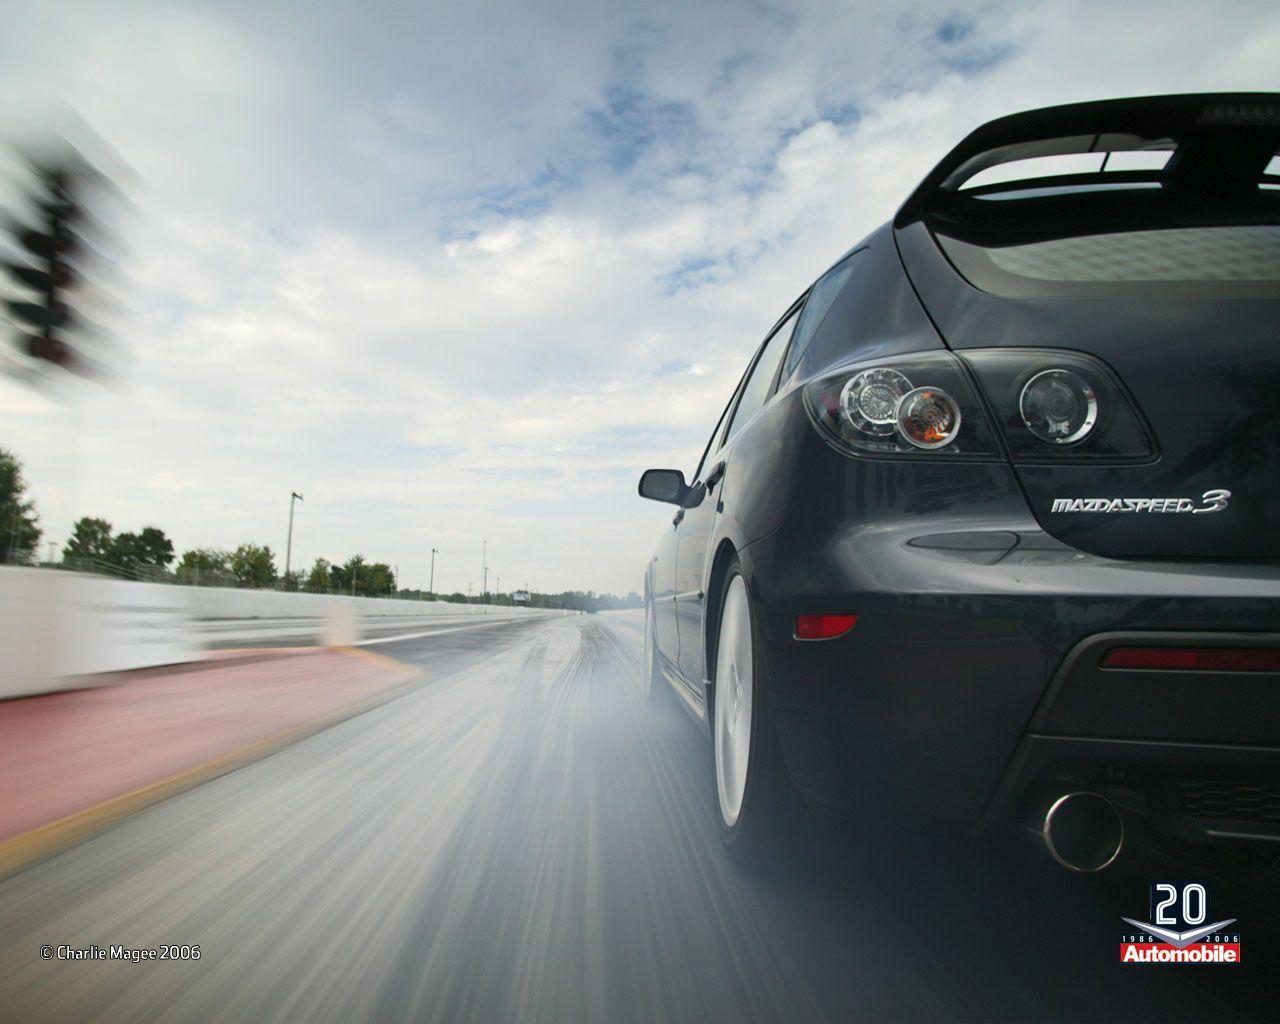 Mazda Mazdaspeed3 Wallpaper HD Photo, Wallpaper and other Image